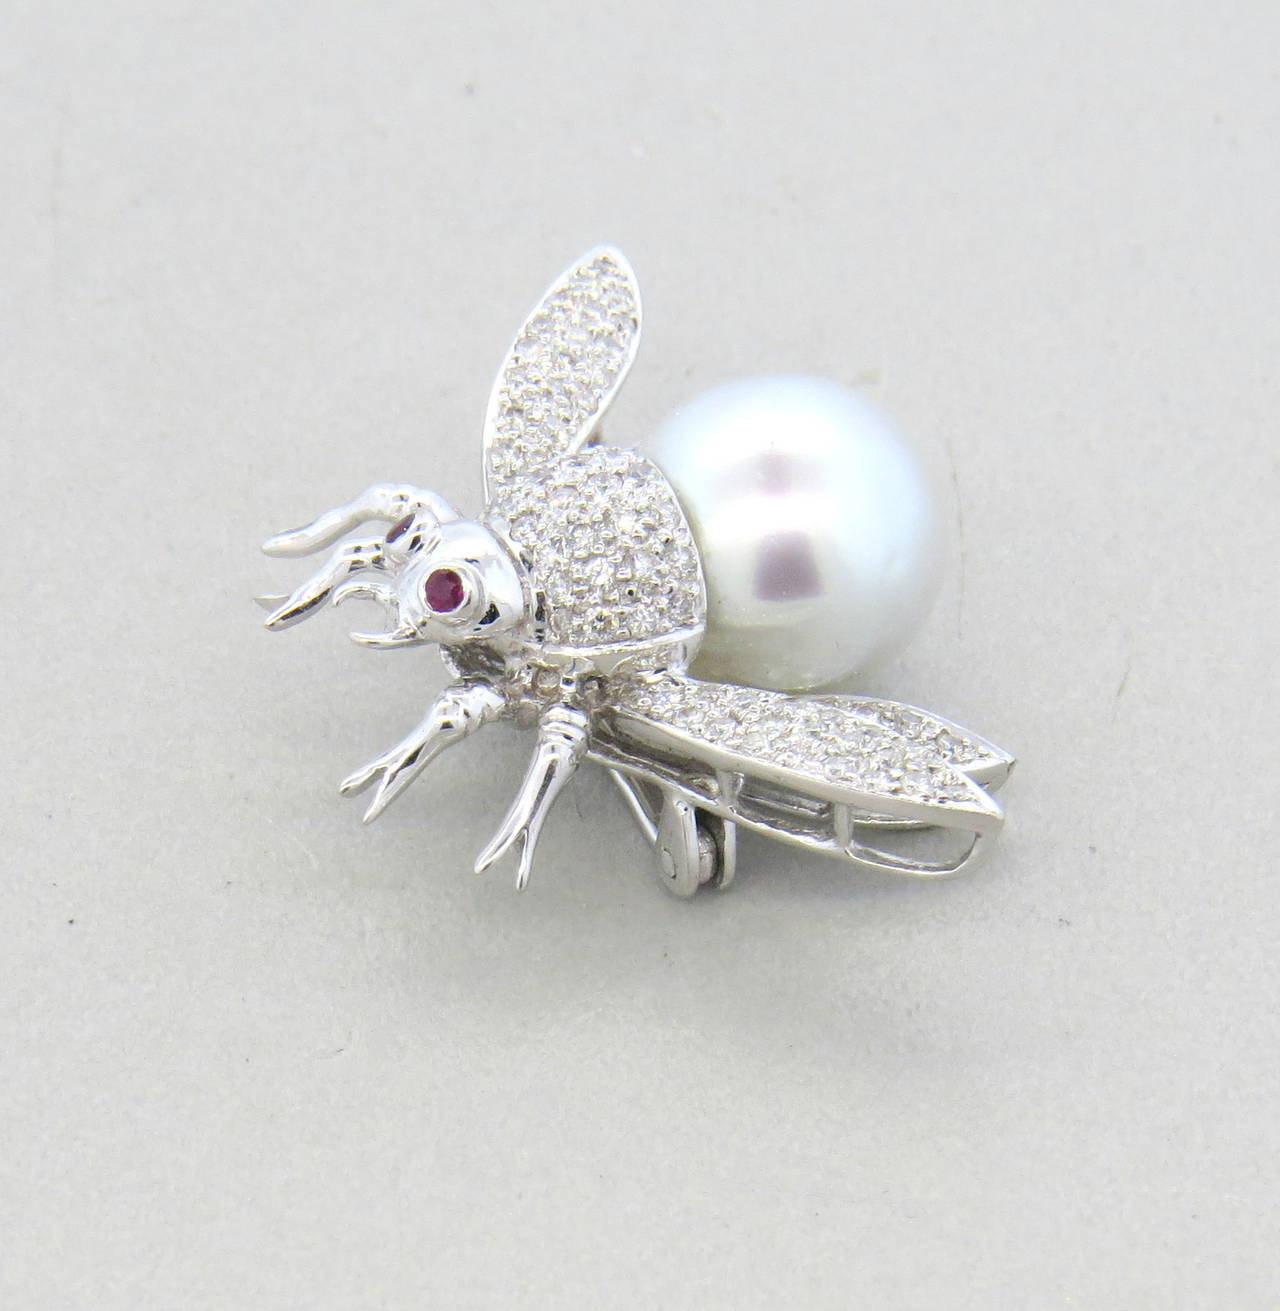 An 18k white gold bumble bee pin set with approximately 0.60ctw in G/VS diamonds, a 12.6mm south sea pearl and two ruby eyes.  The pin measures 25mm x 35mm and weighs 10.3 grams.